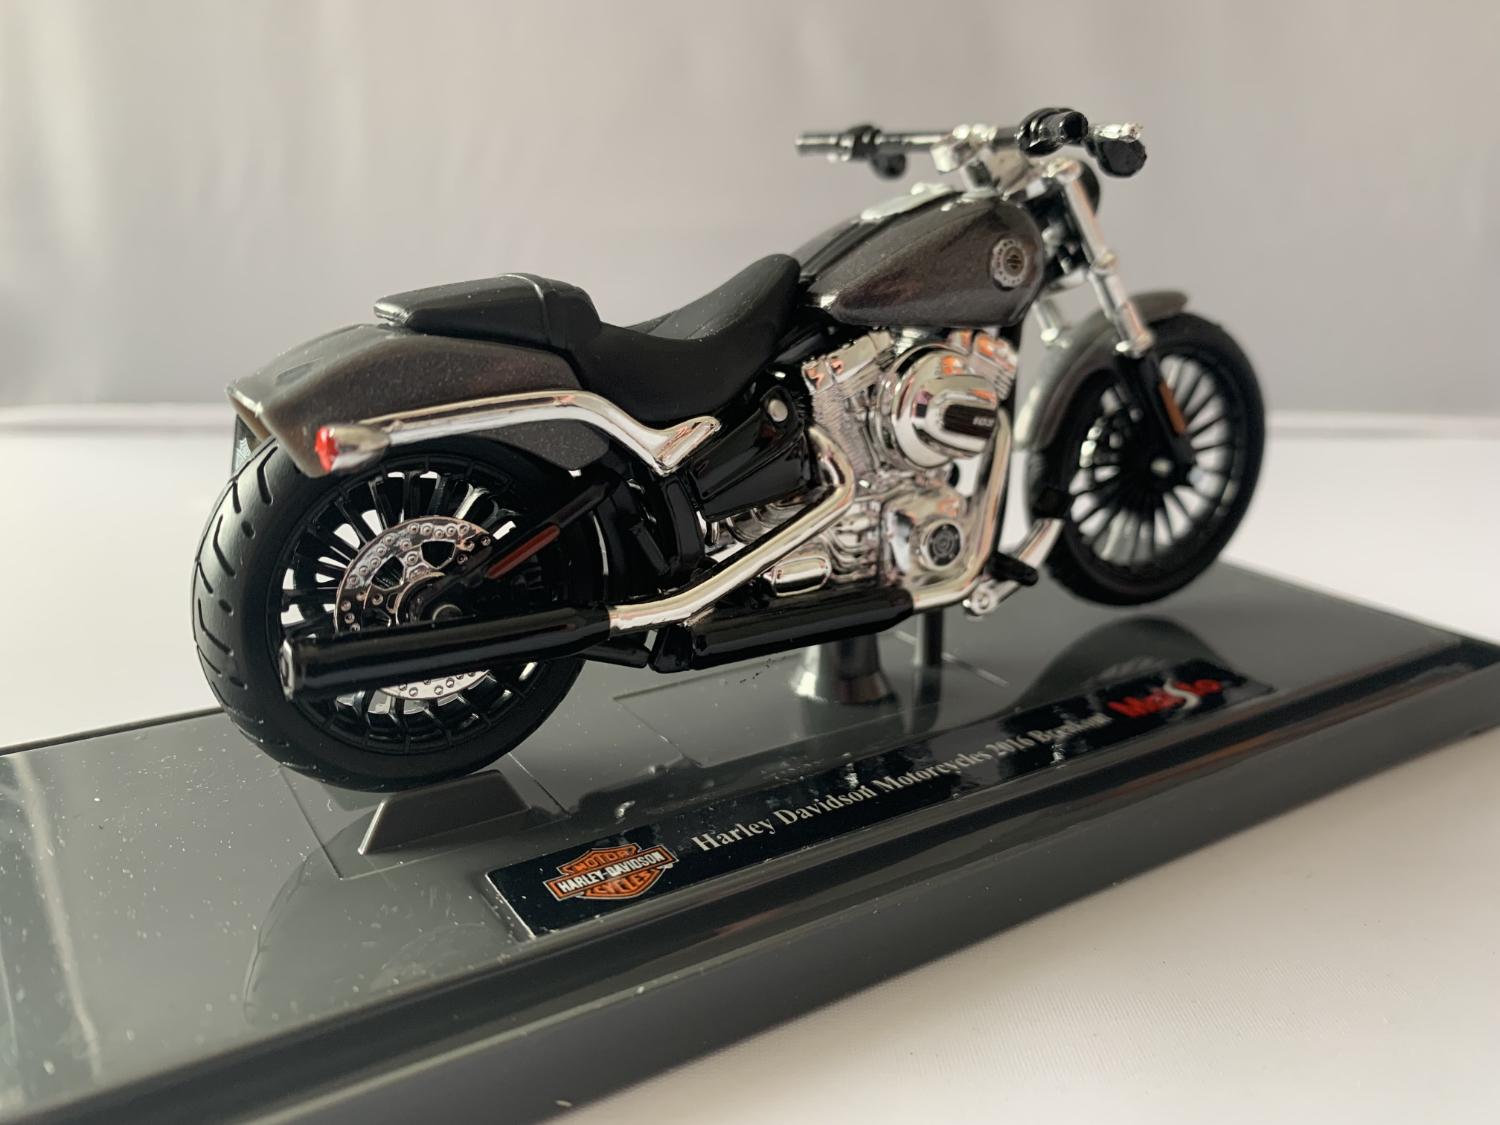 Harley Davidson 2016 Breakout in metallic grey 1:18 scale motorcycle  model from Maisto, MAI20112